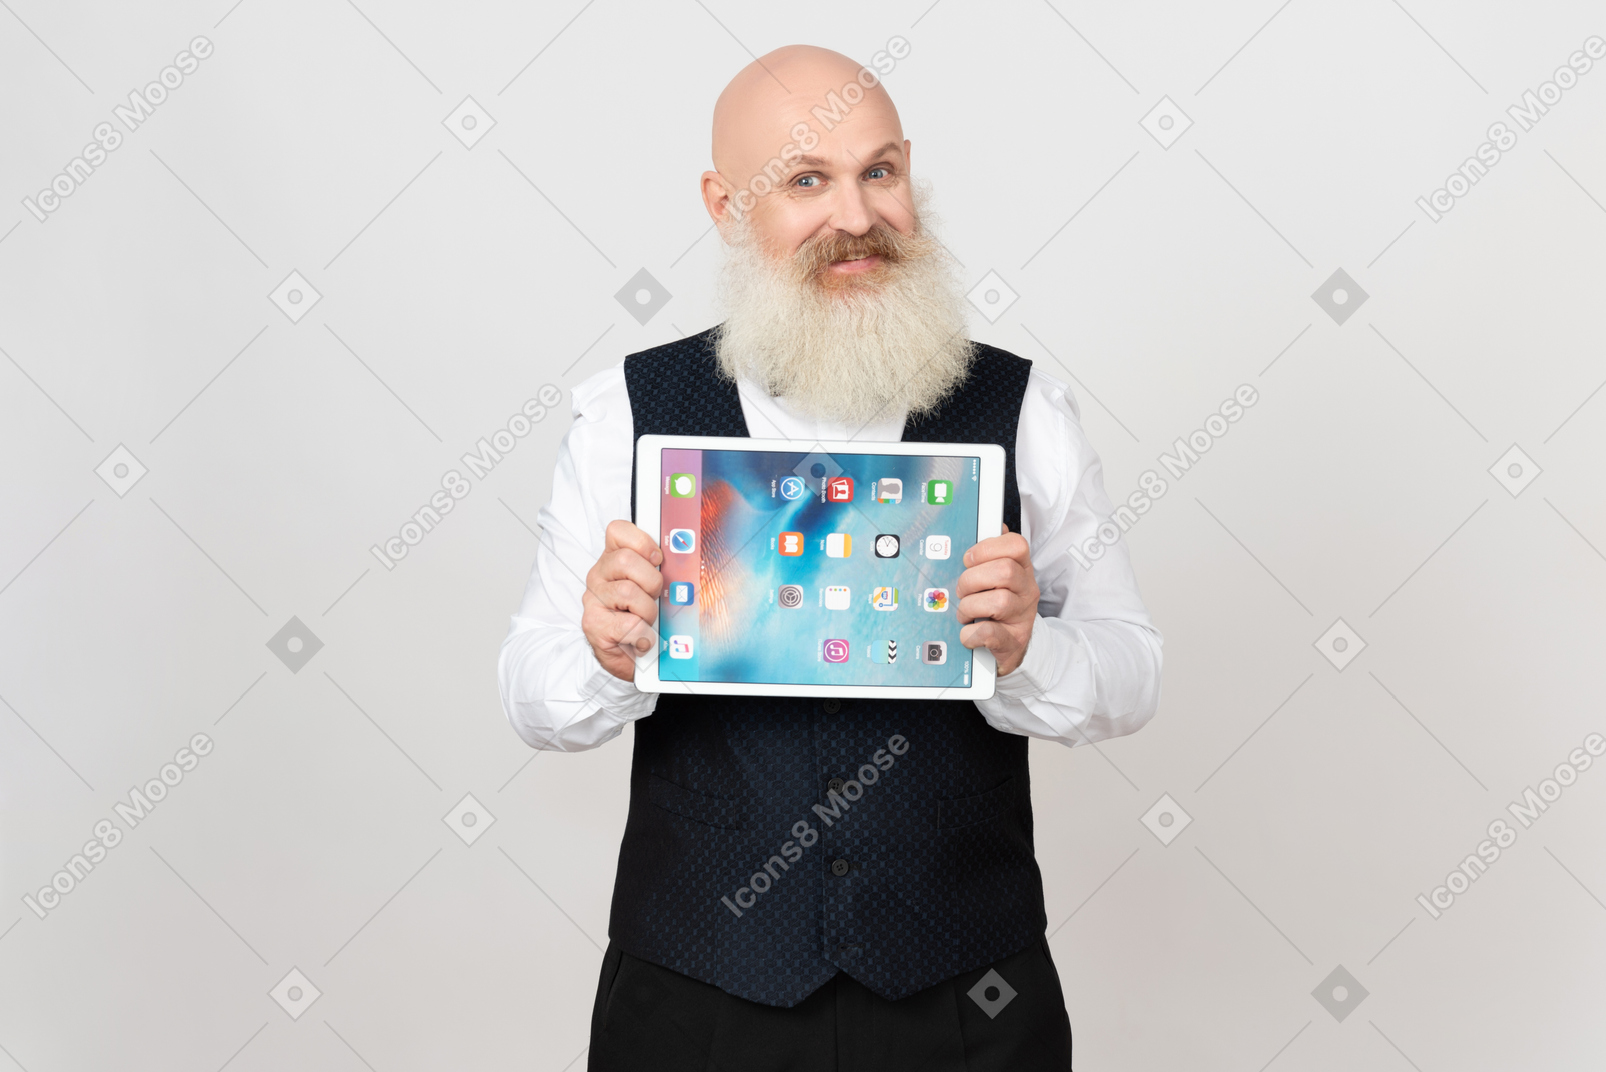 Smiling aged man holding ipad with both hands